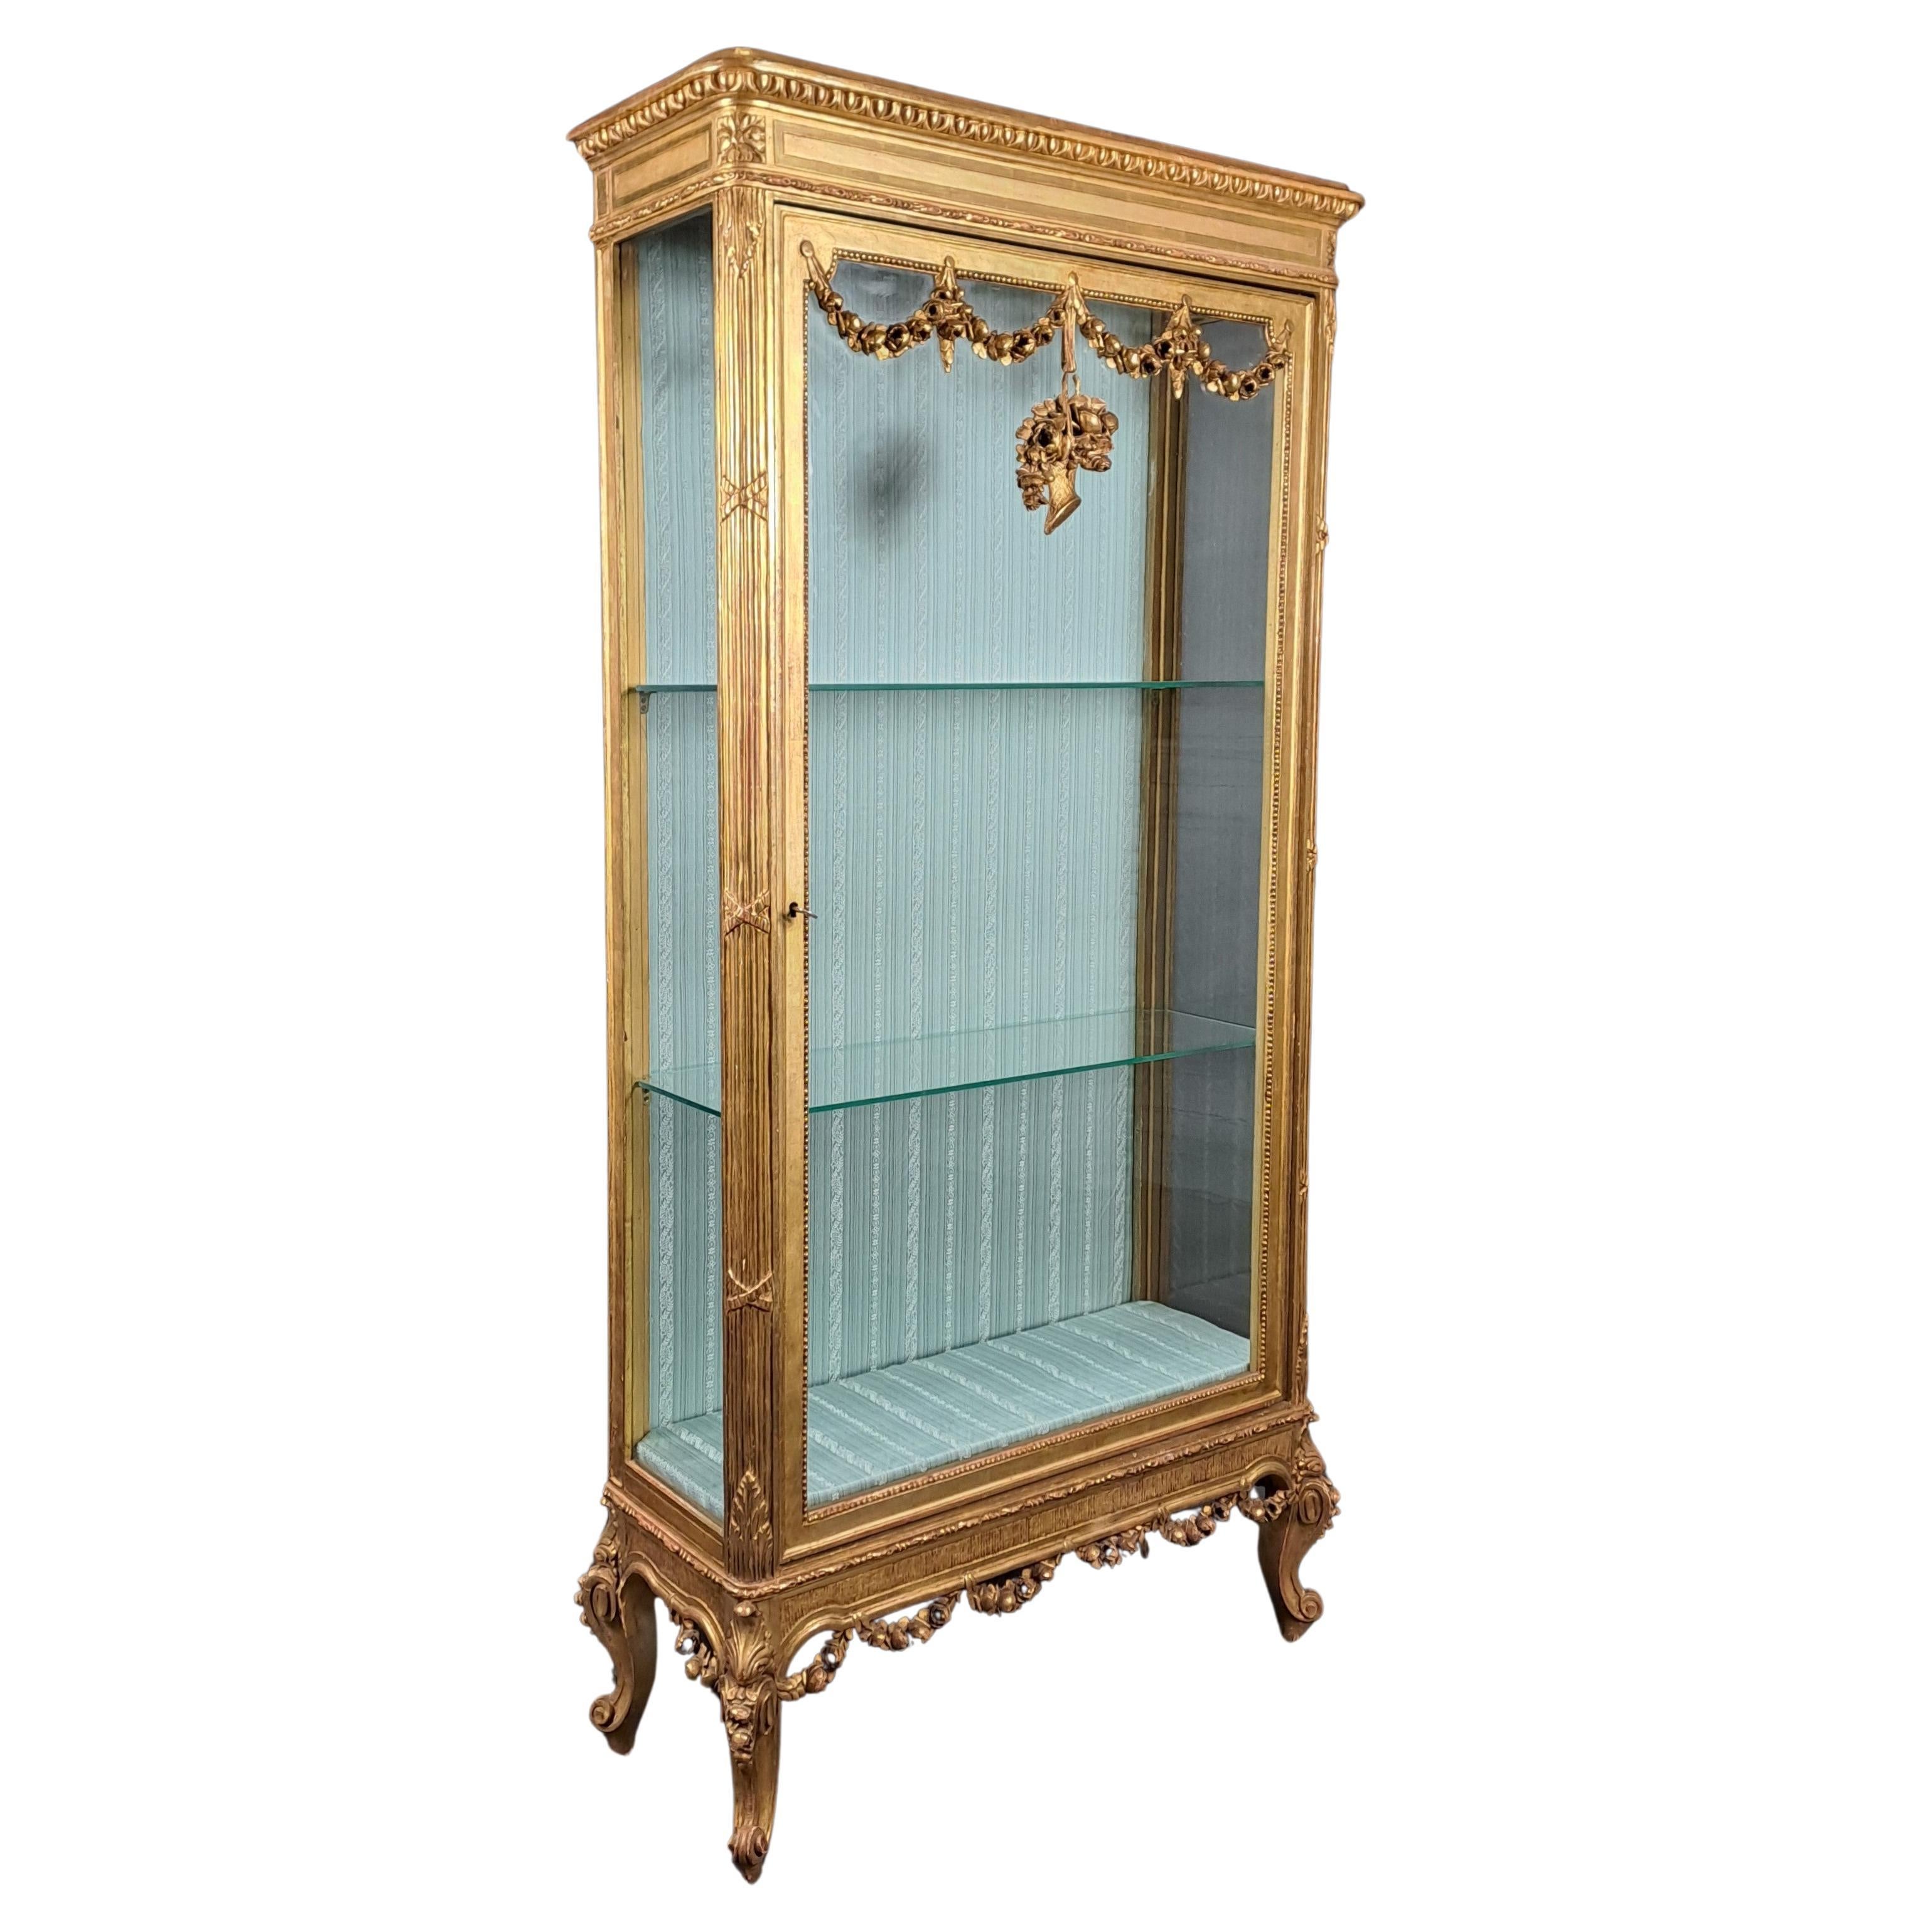 Transition Style Vitrine In Golden Wood From The 19th Century For Sale